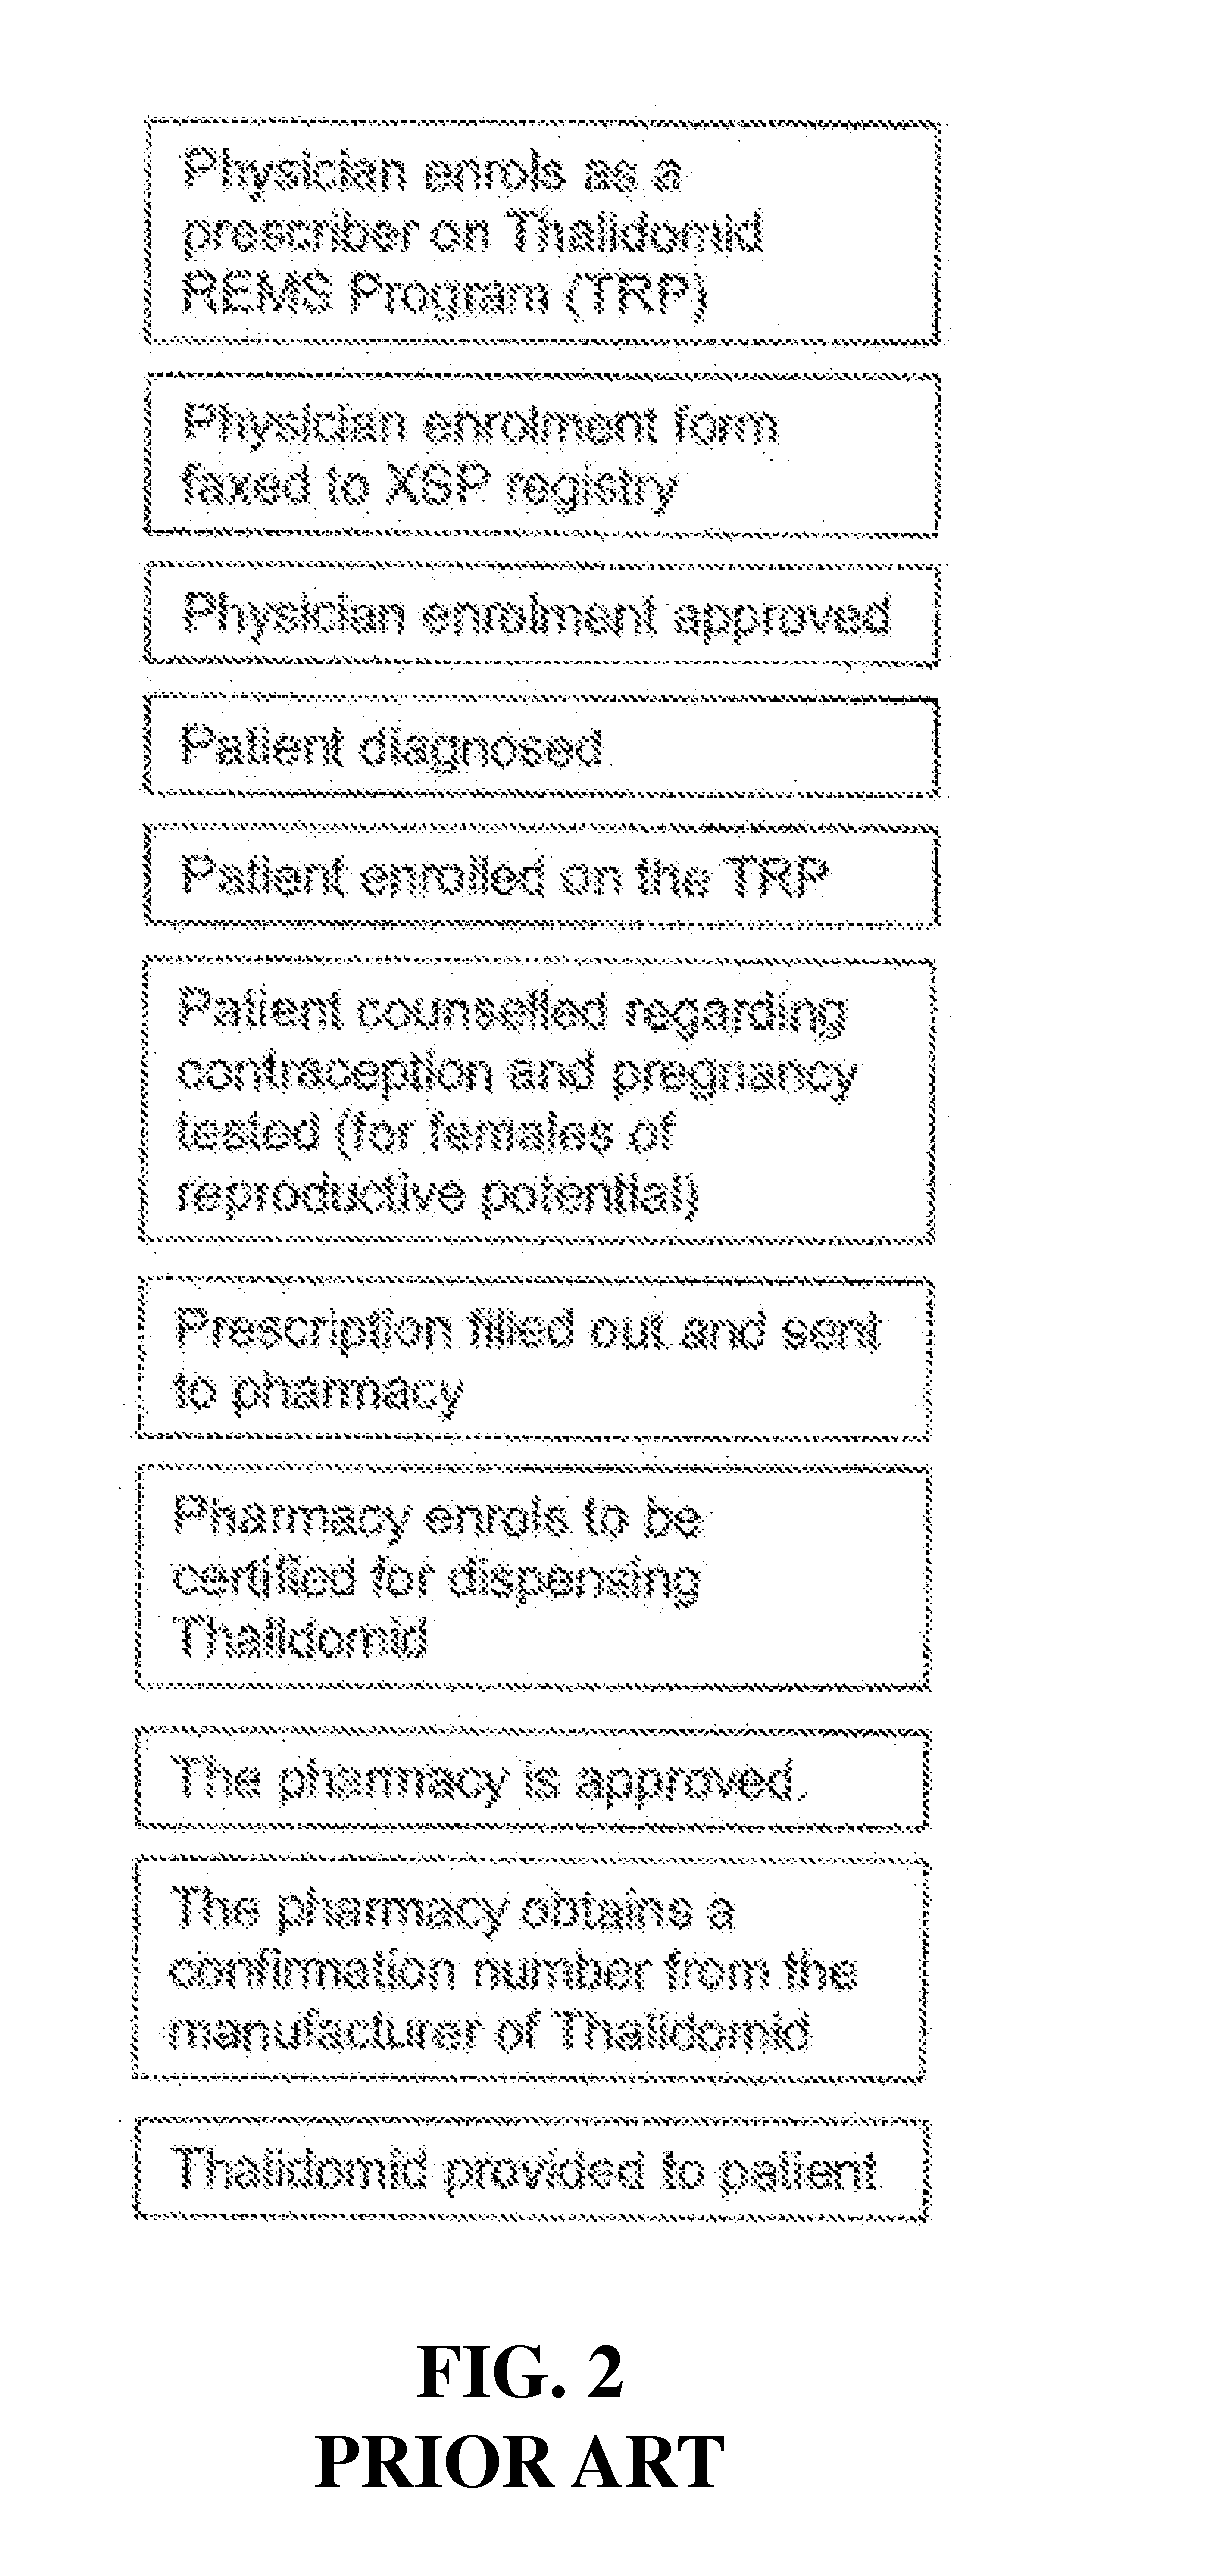 Control system for control of distribution of medication